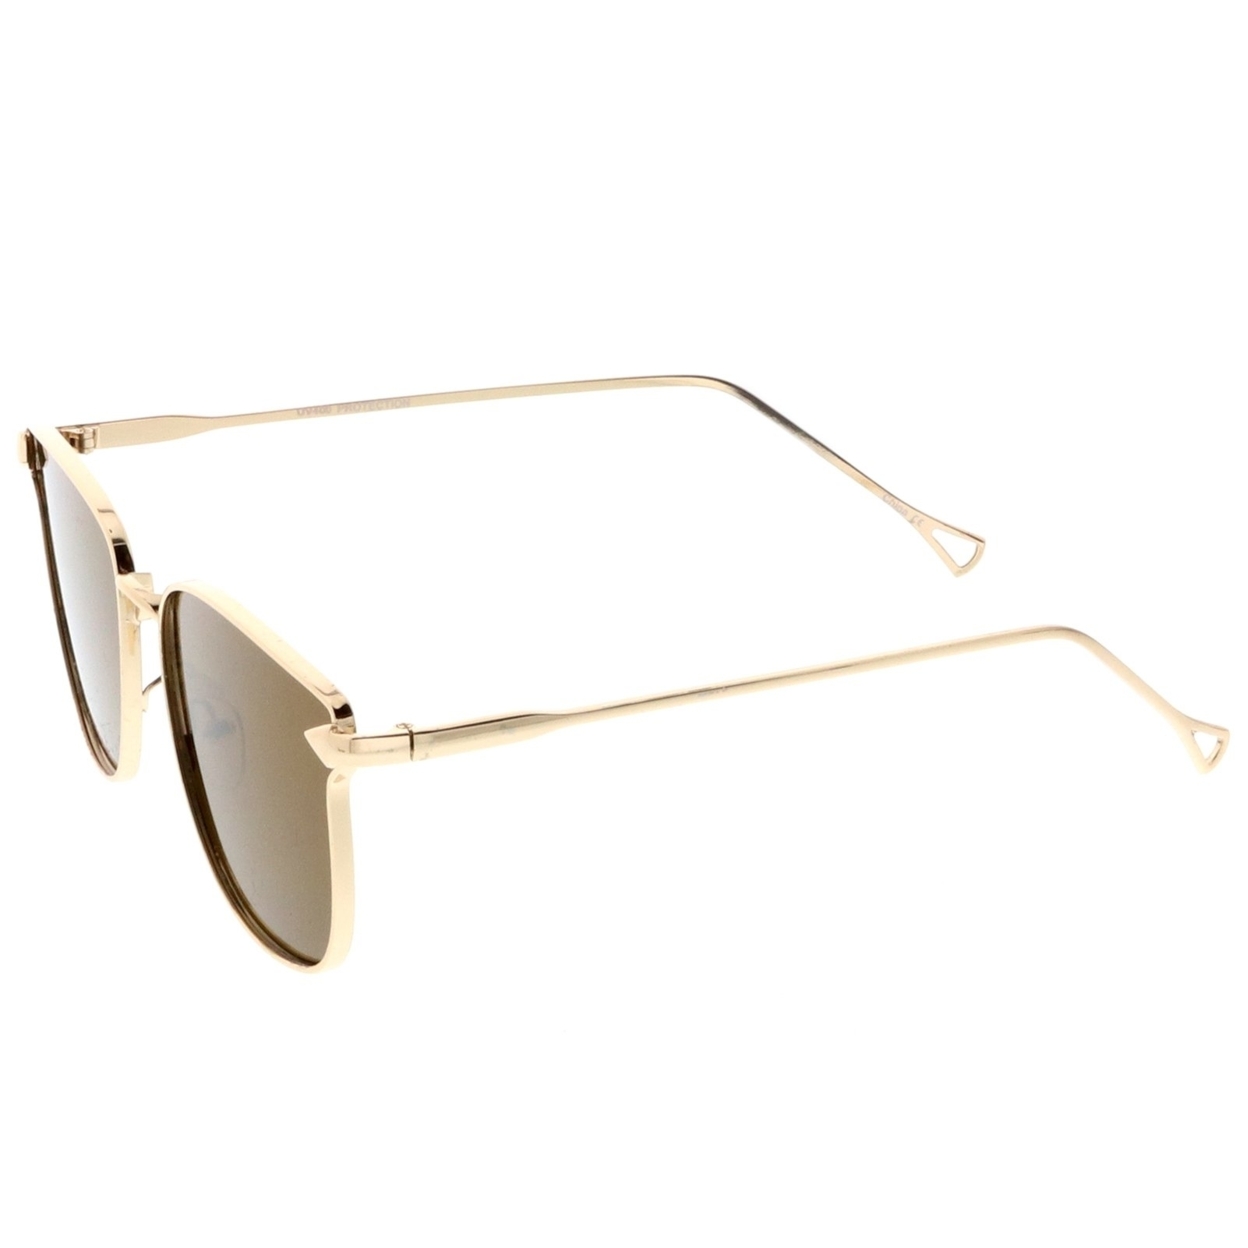 Modern Metal Square Sunglasses With Flat Lenses And Slim Hook Arms 55mm - Gold / Green